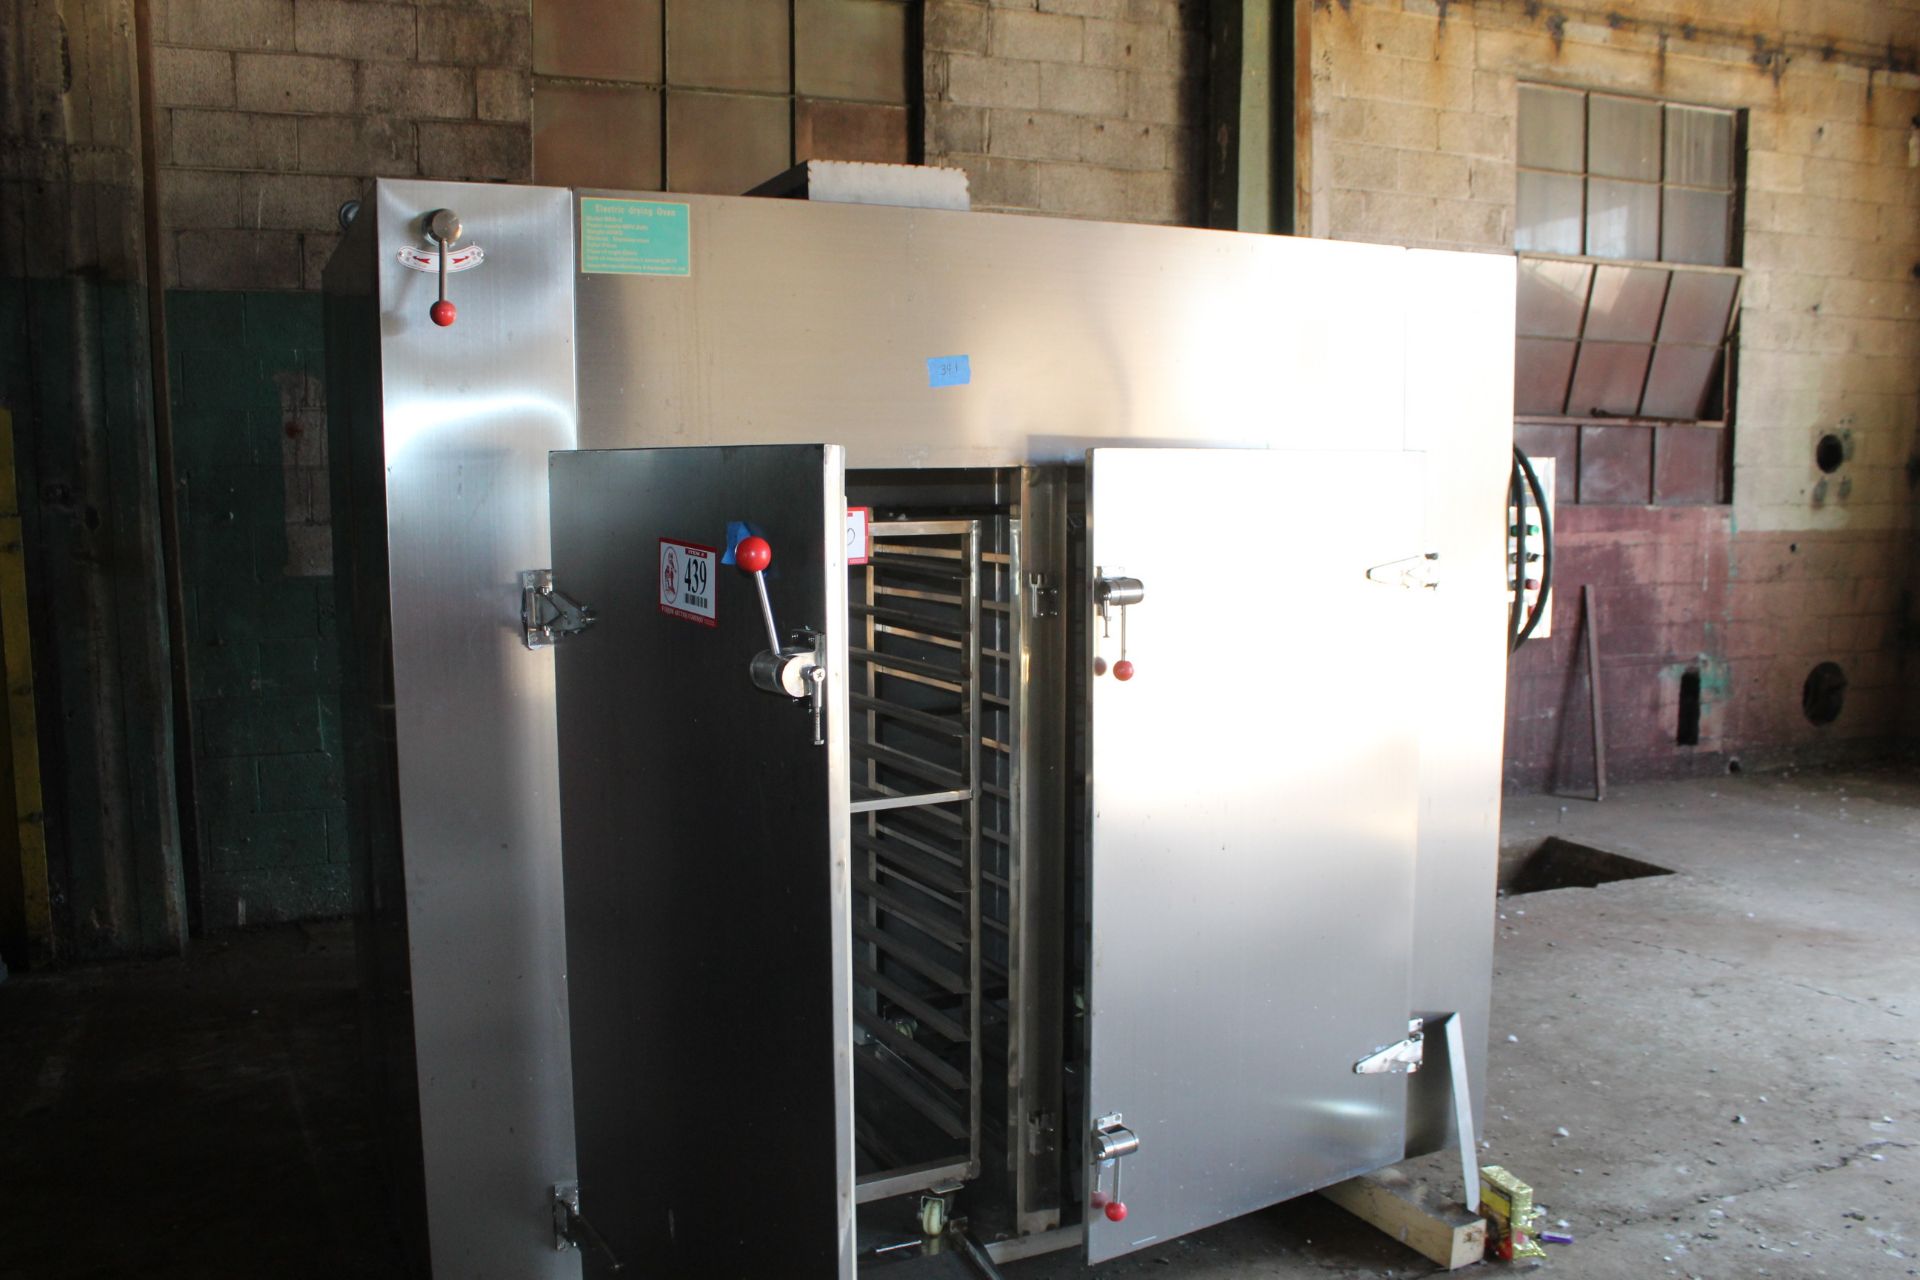 Henan Worker Machinery, Electric Cabinet Drying Oven, 1323 Lbs.